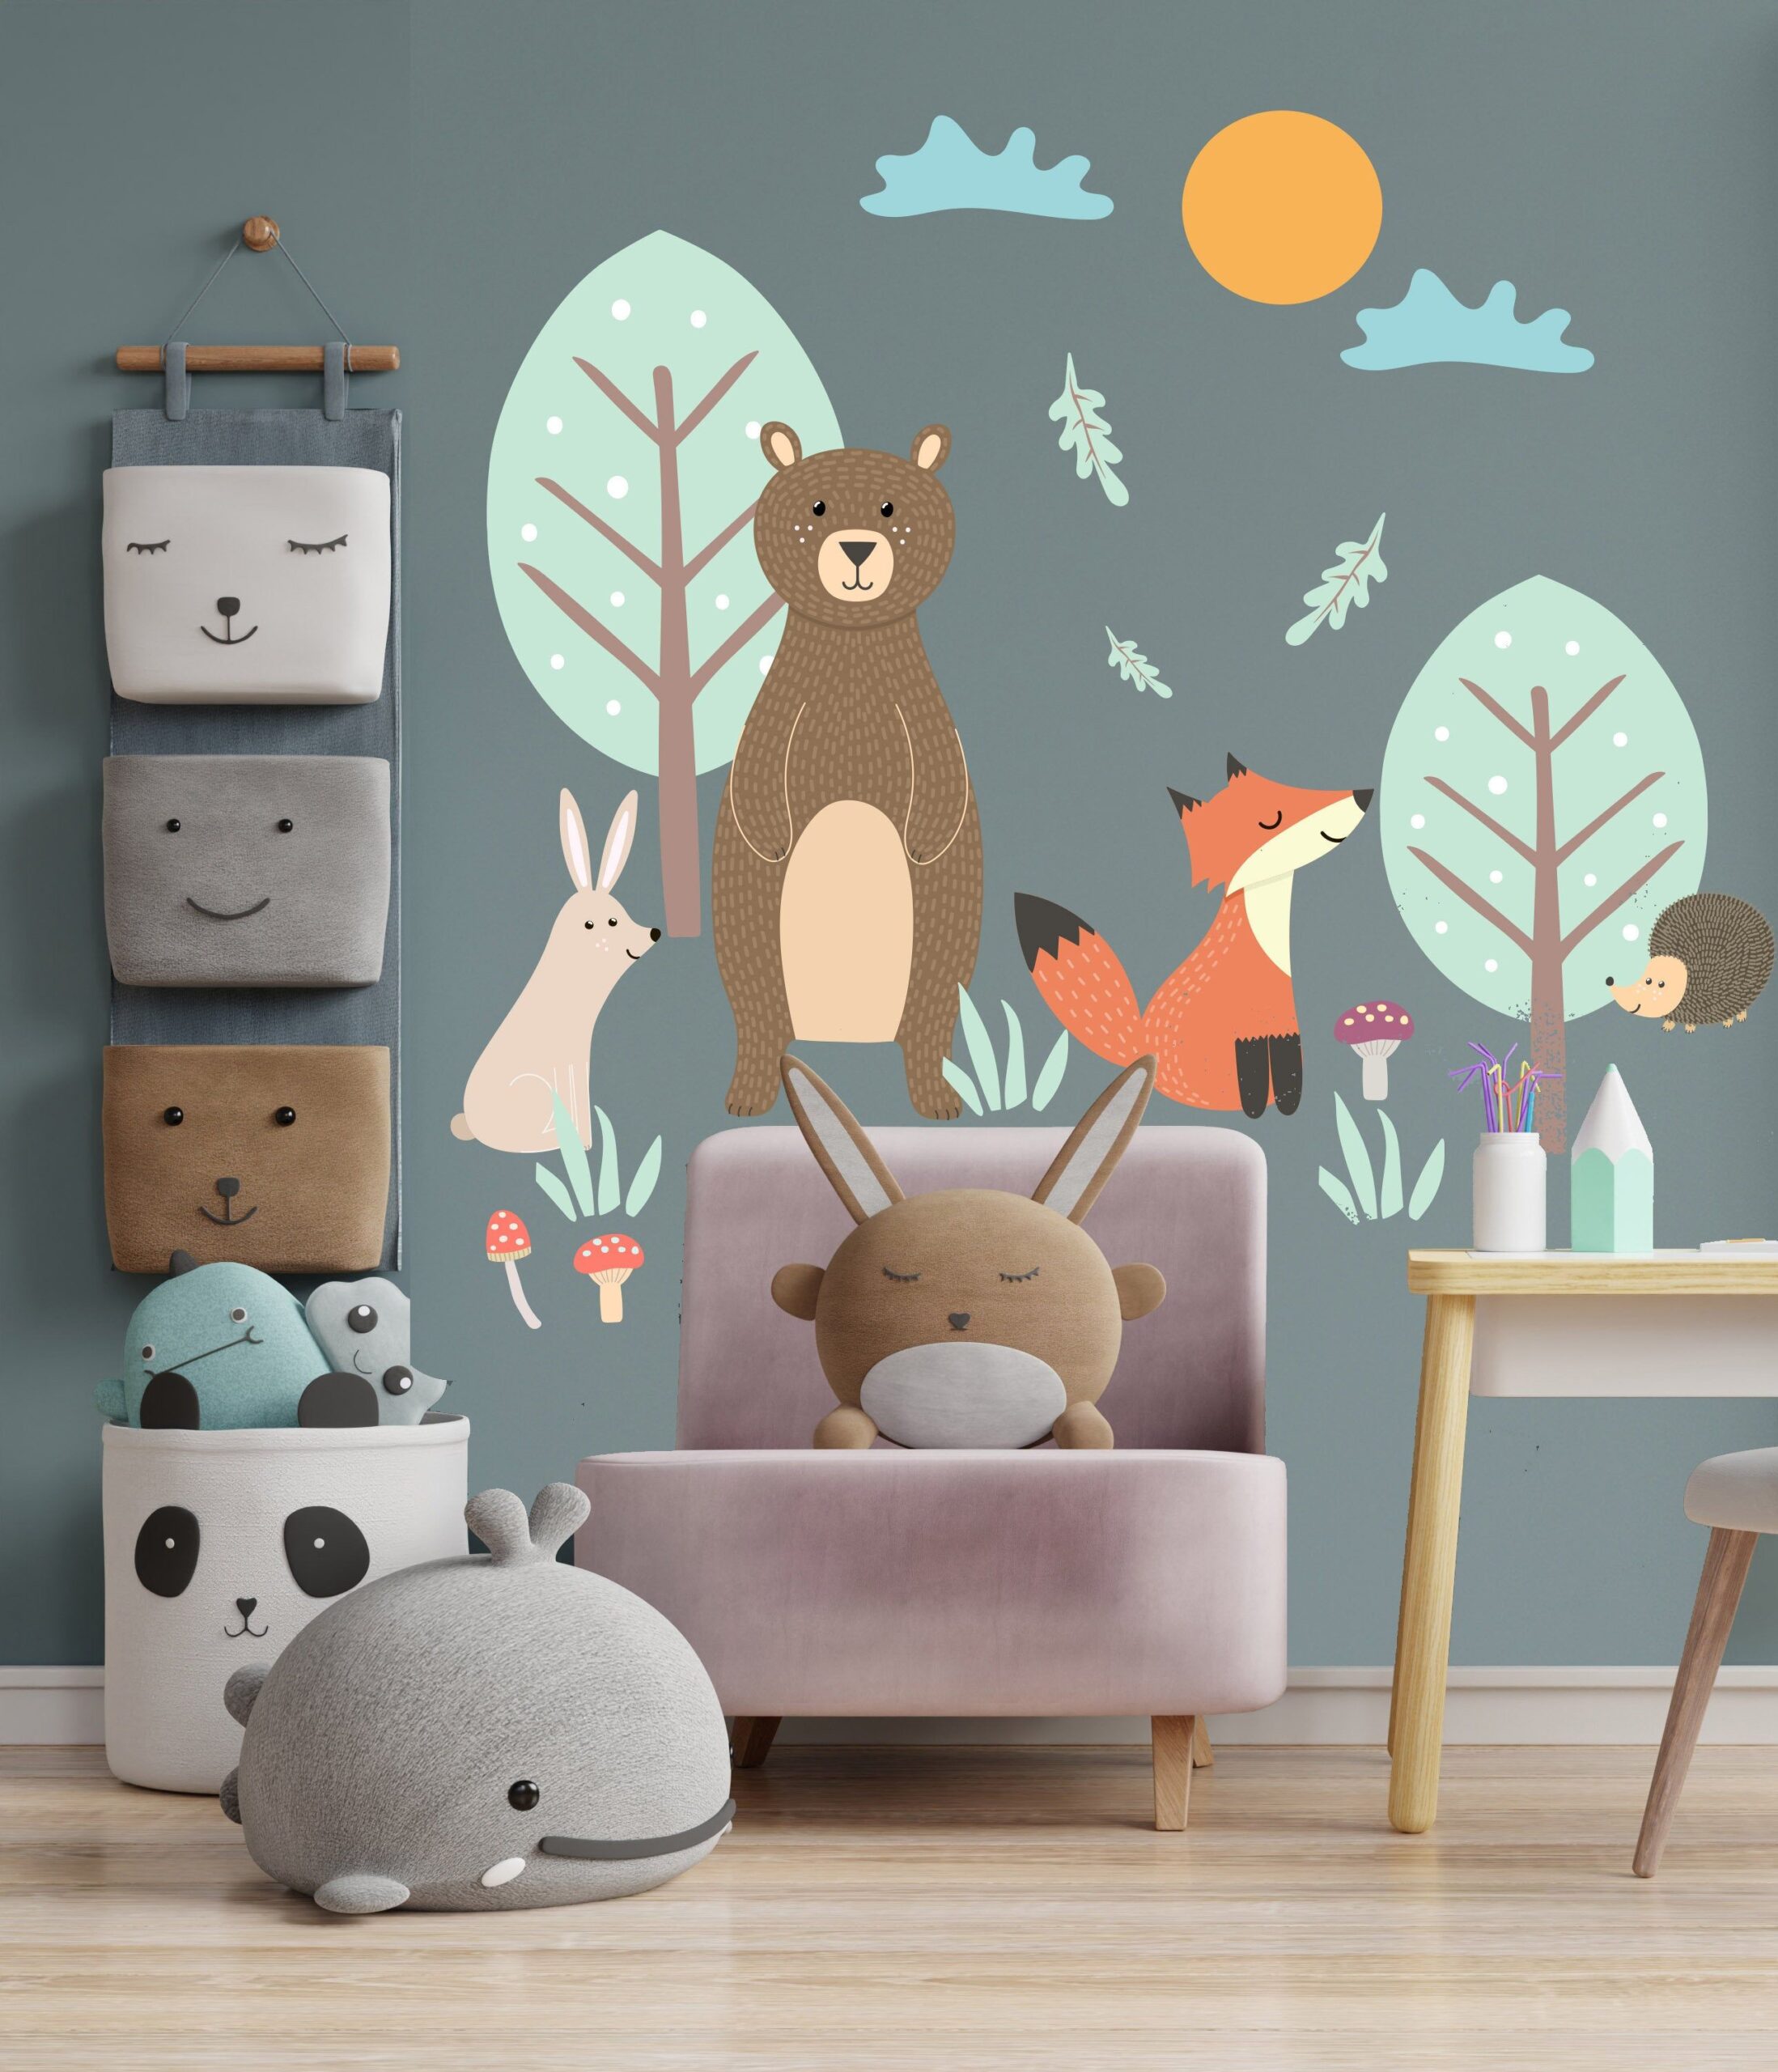 Fun and Creative Wall Decals for Kids’ Rooms